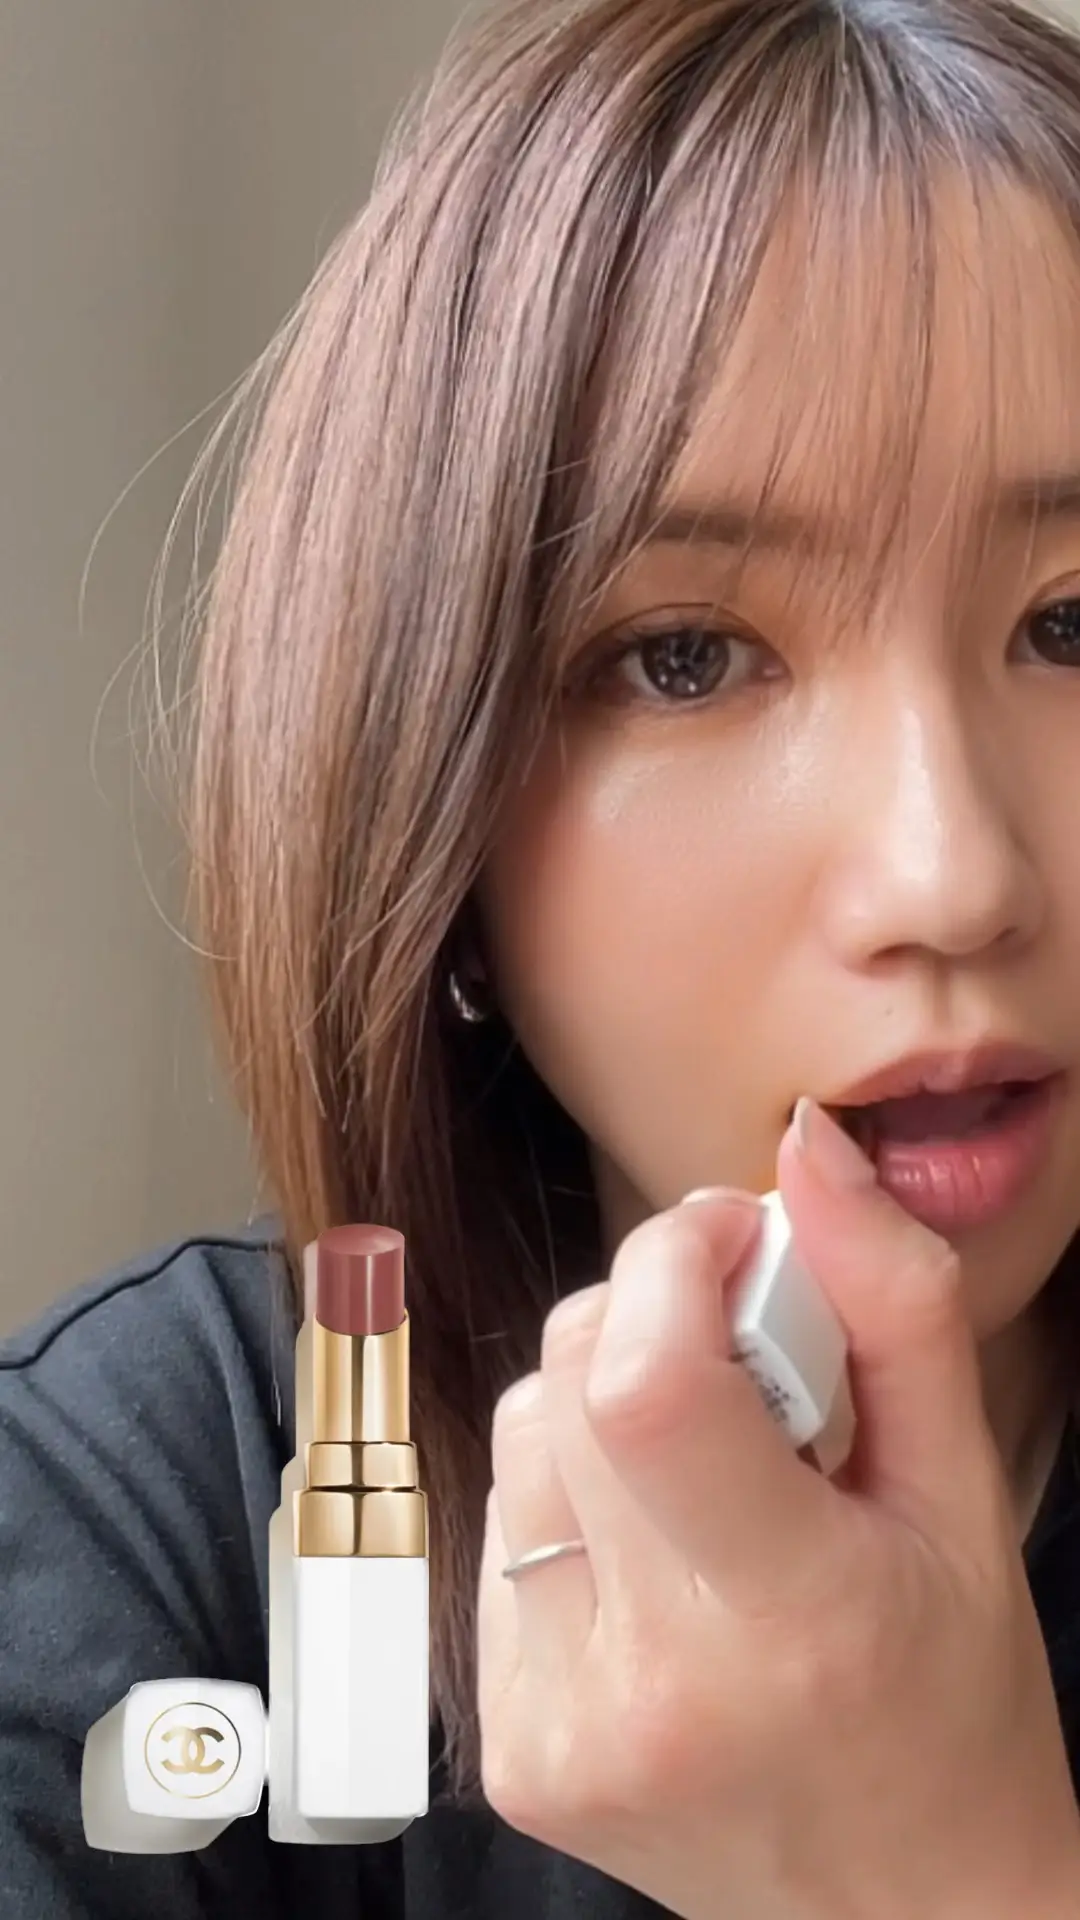 The new color of Chanel., Video published by 須田真衣